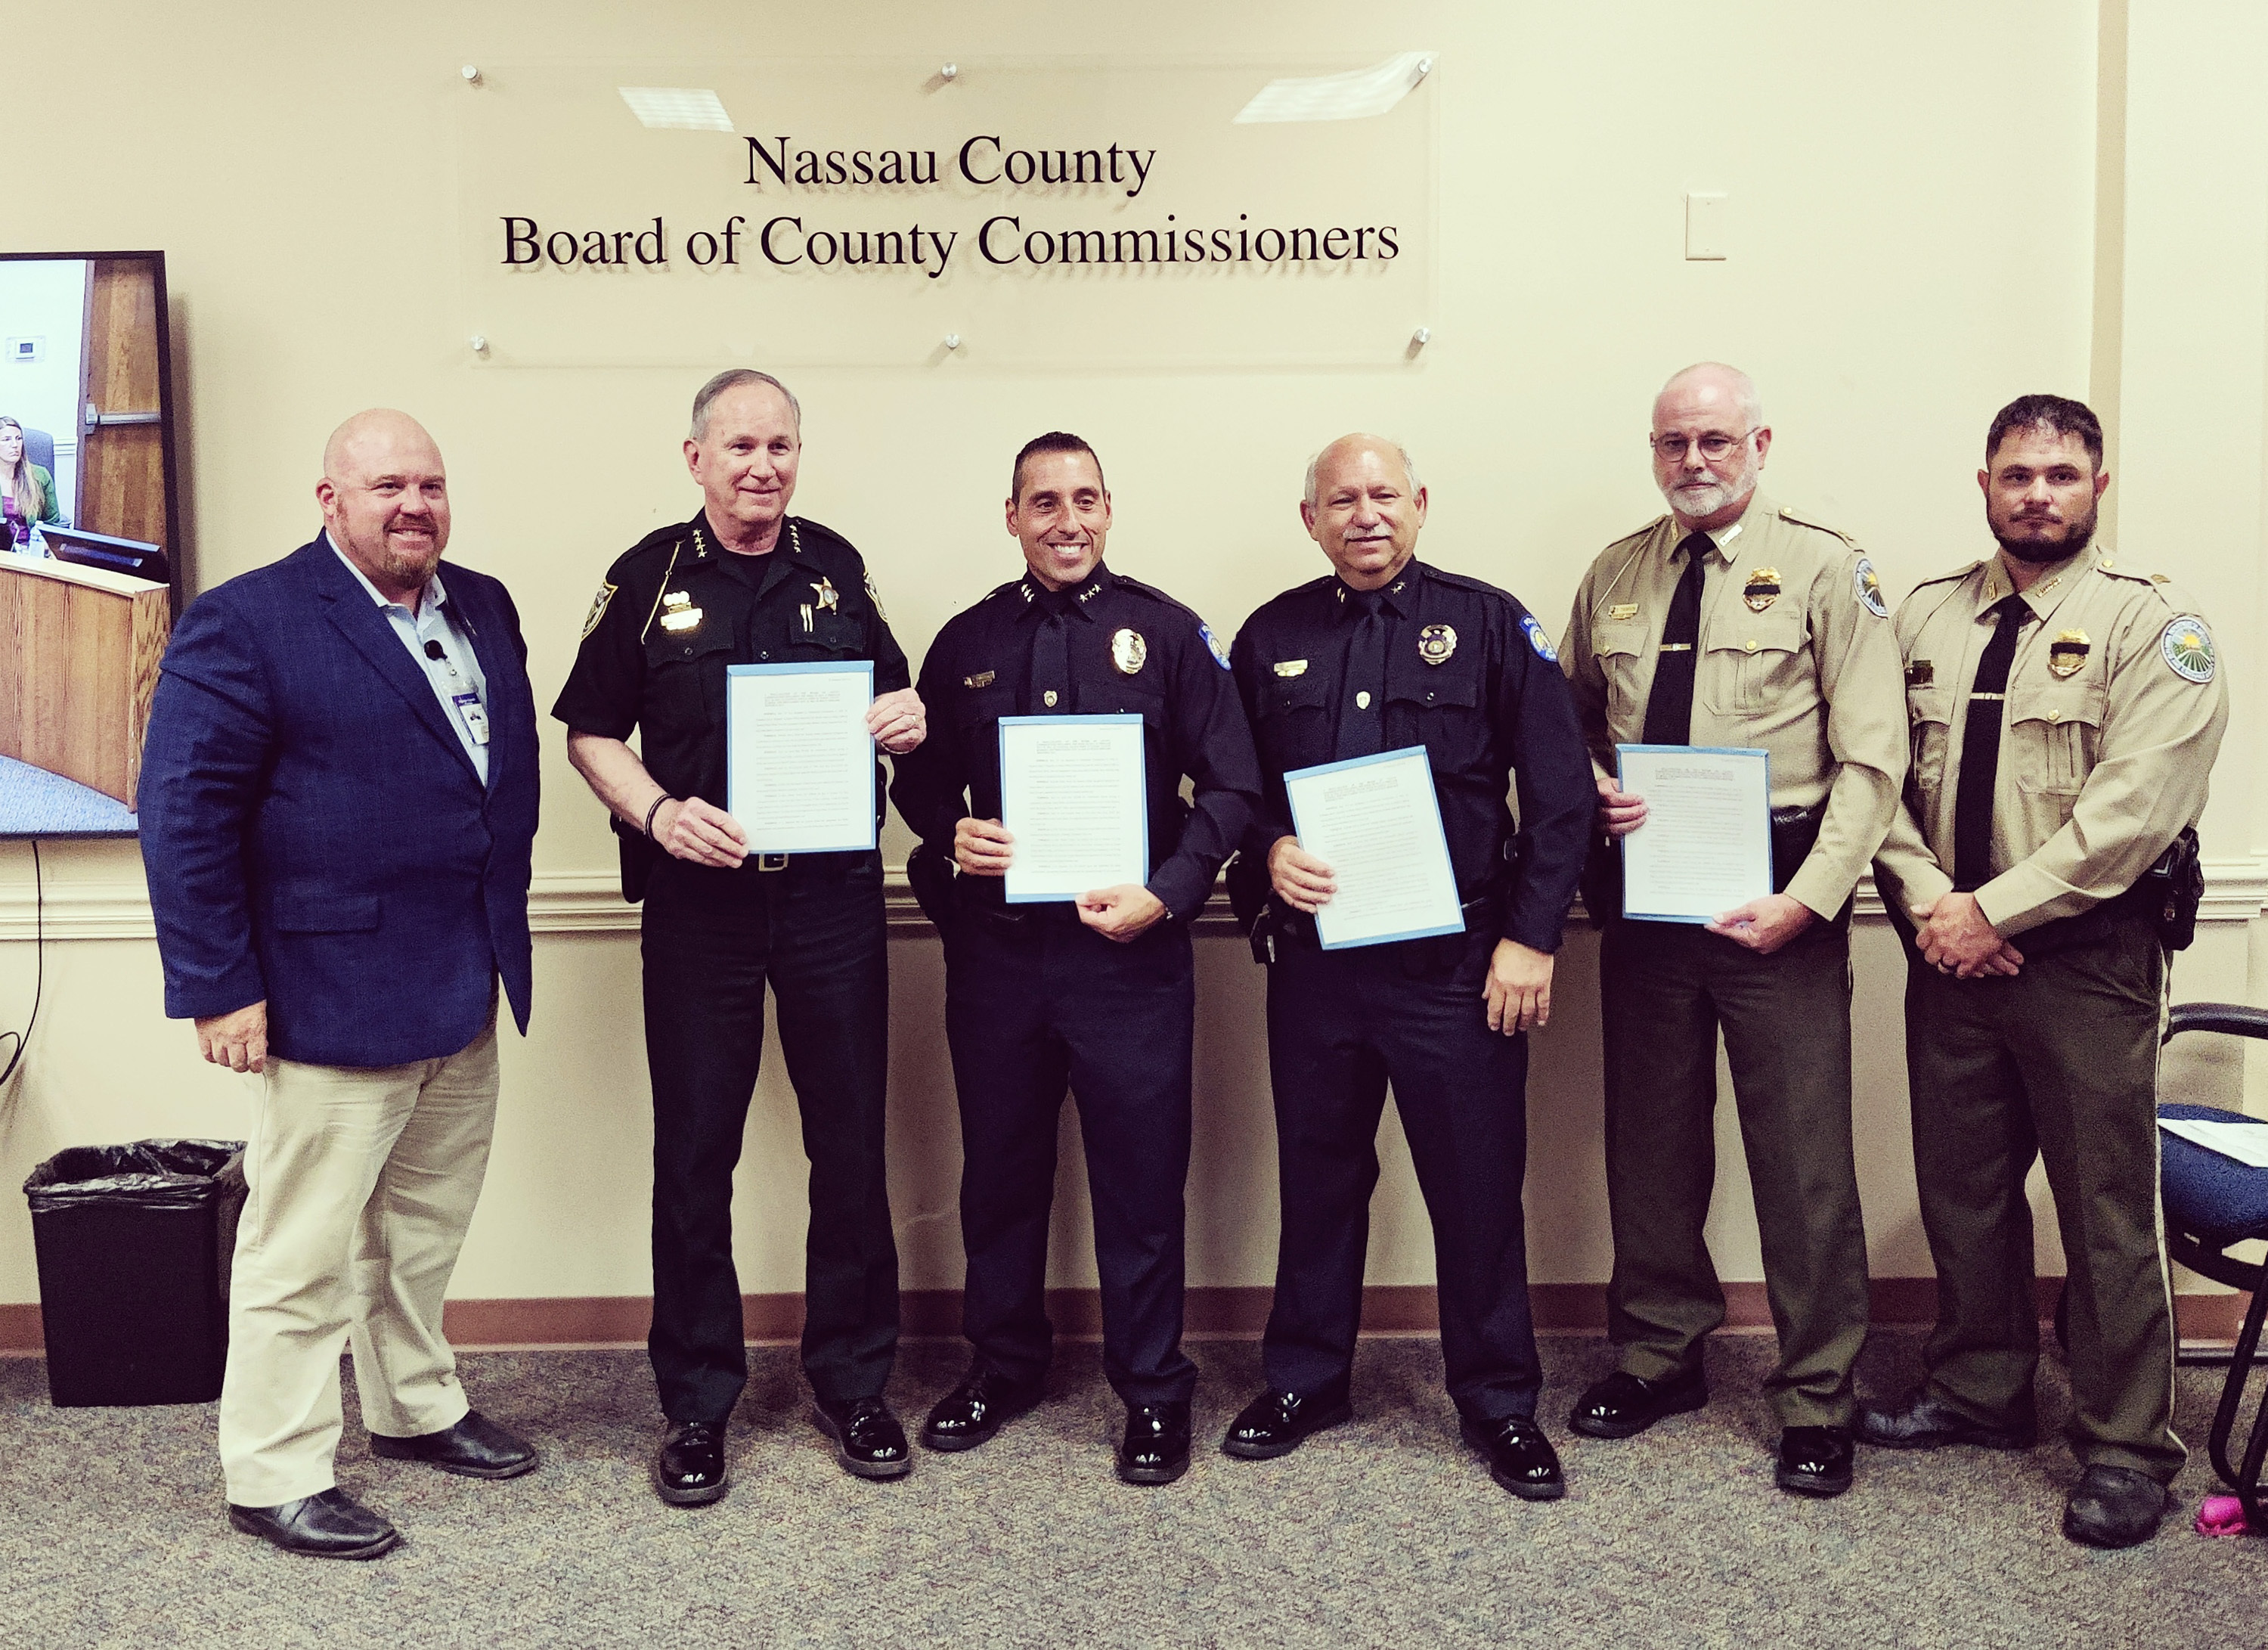 Commissioner Klynt Farmer poses with officers who were in attendance Monday to receive the proclamation declaring May 12-18 as National Police Week and May 15 as Peace Officers Memorial Day in Nassau County. Photo by Ashley Chandler/News-Leader